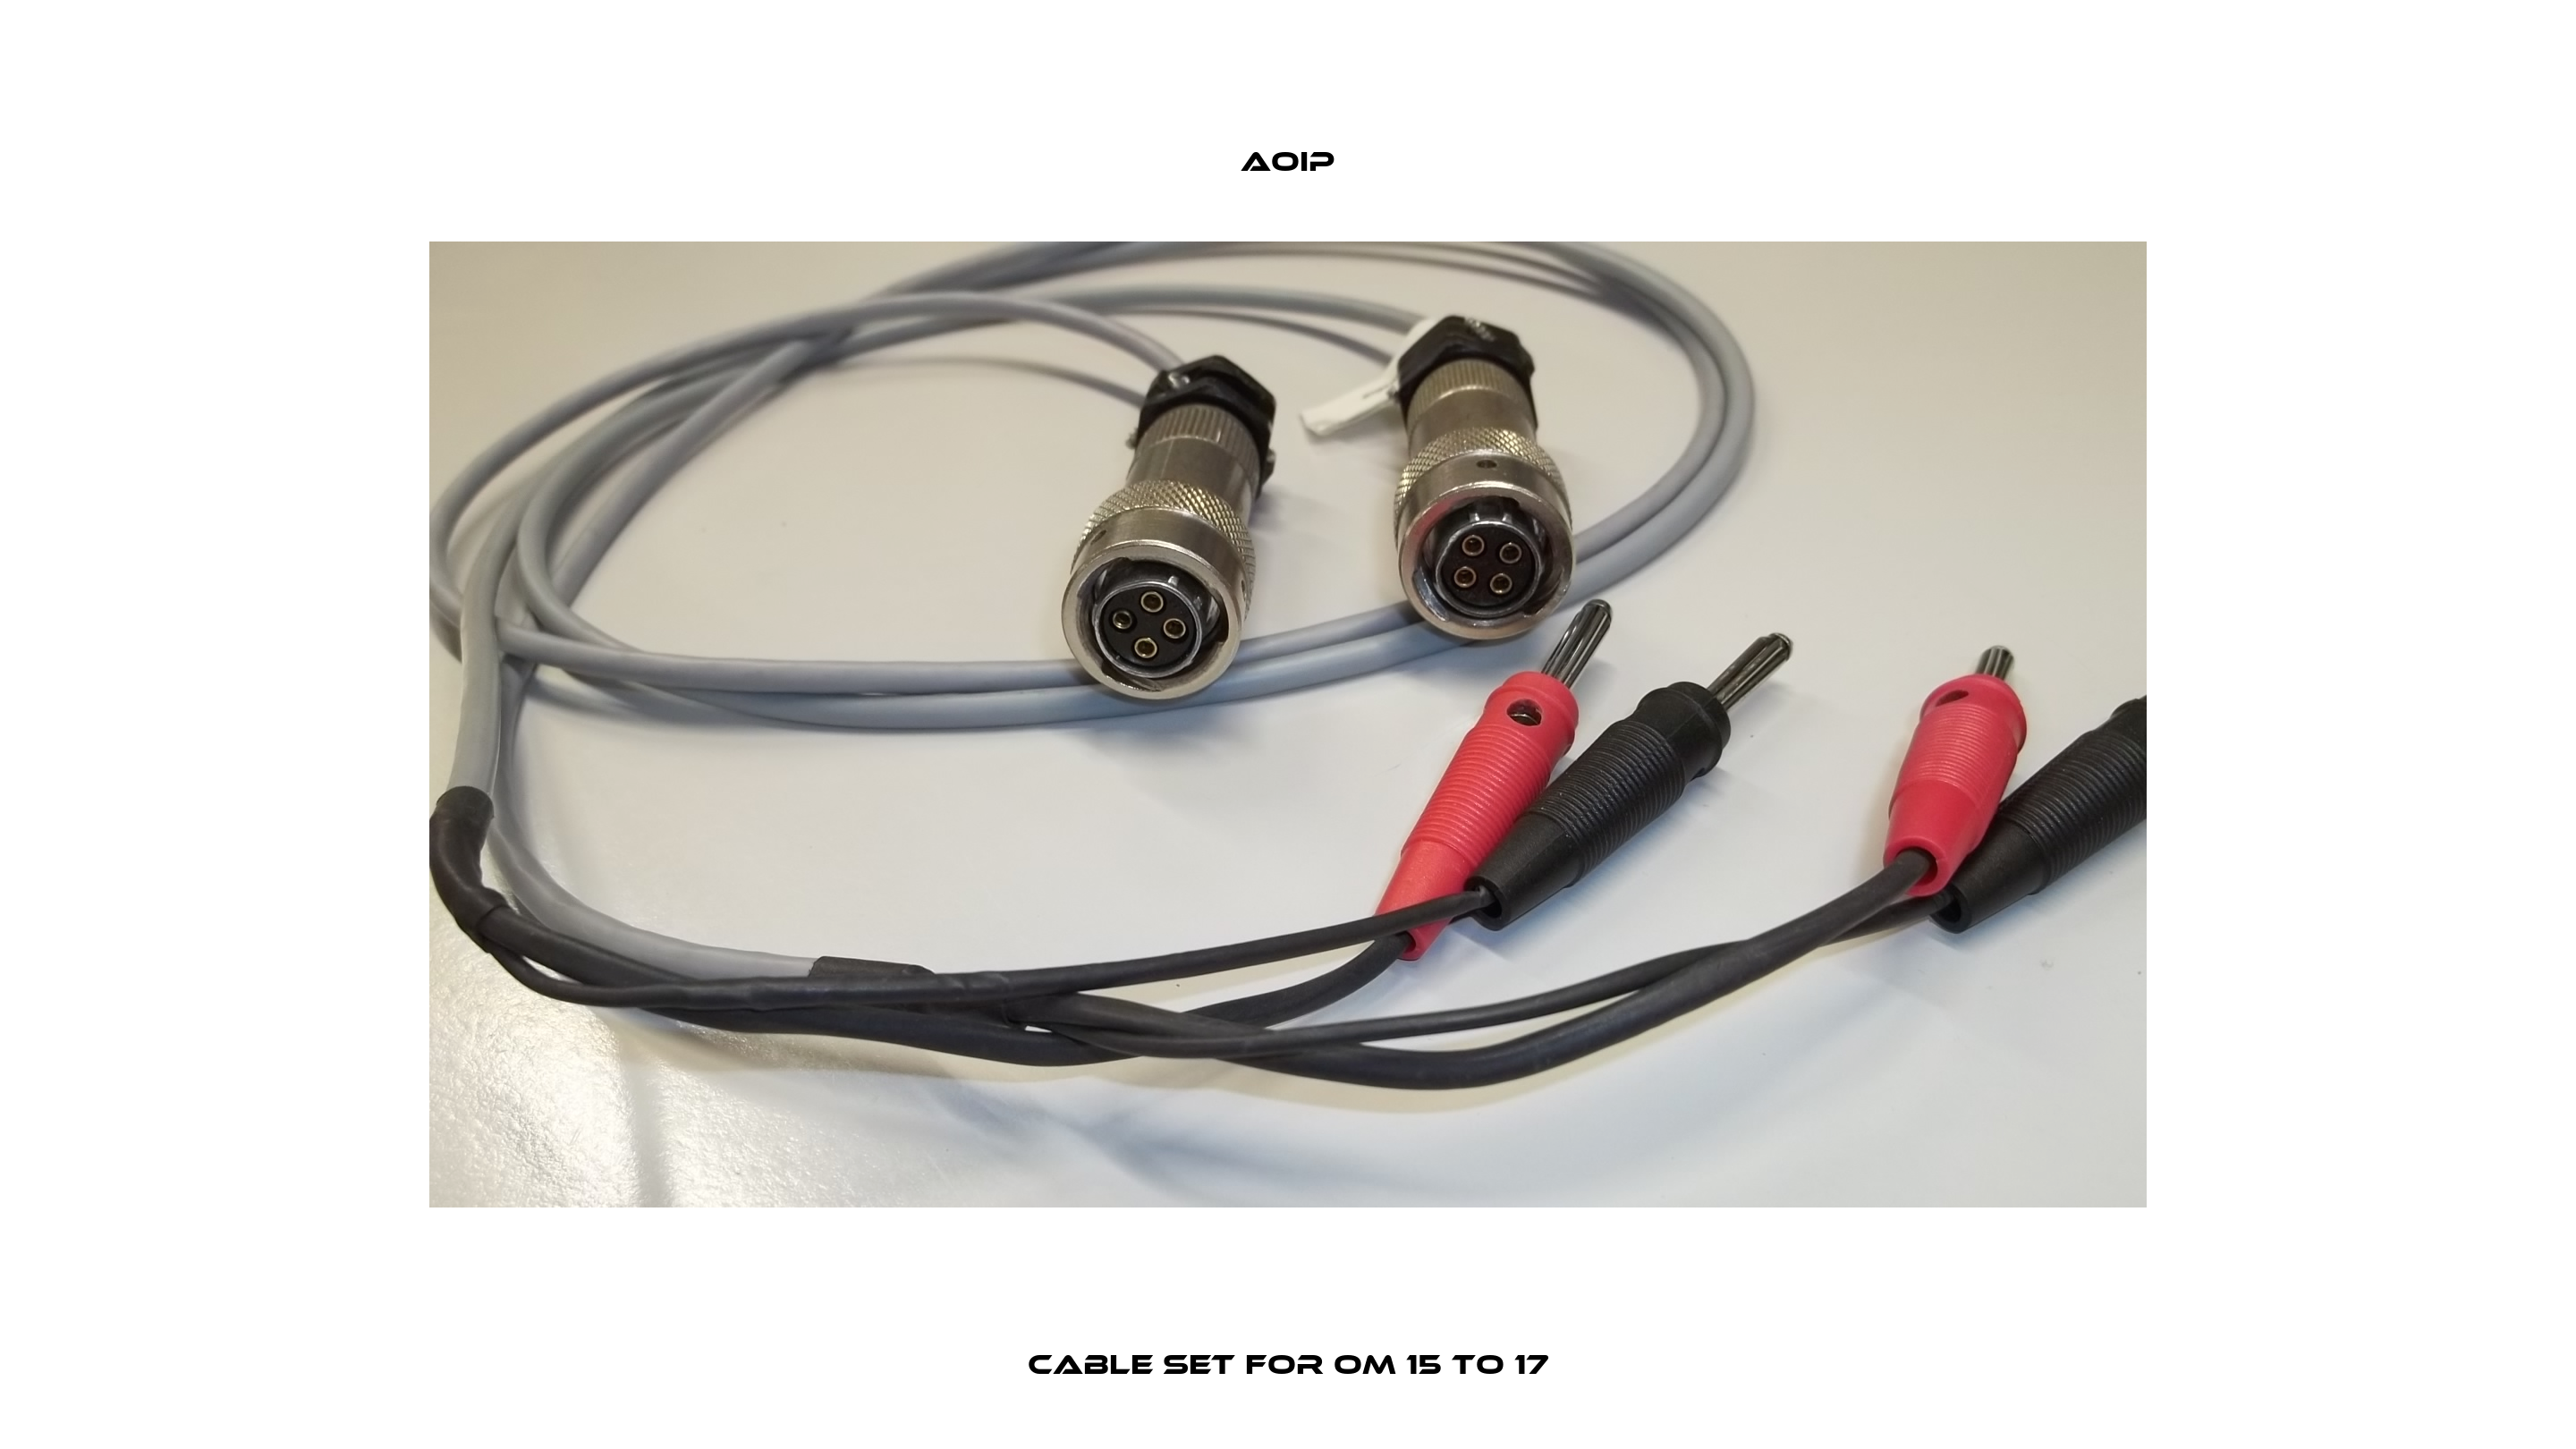 cable set for OM 15 to 17 Aoip